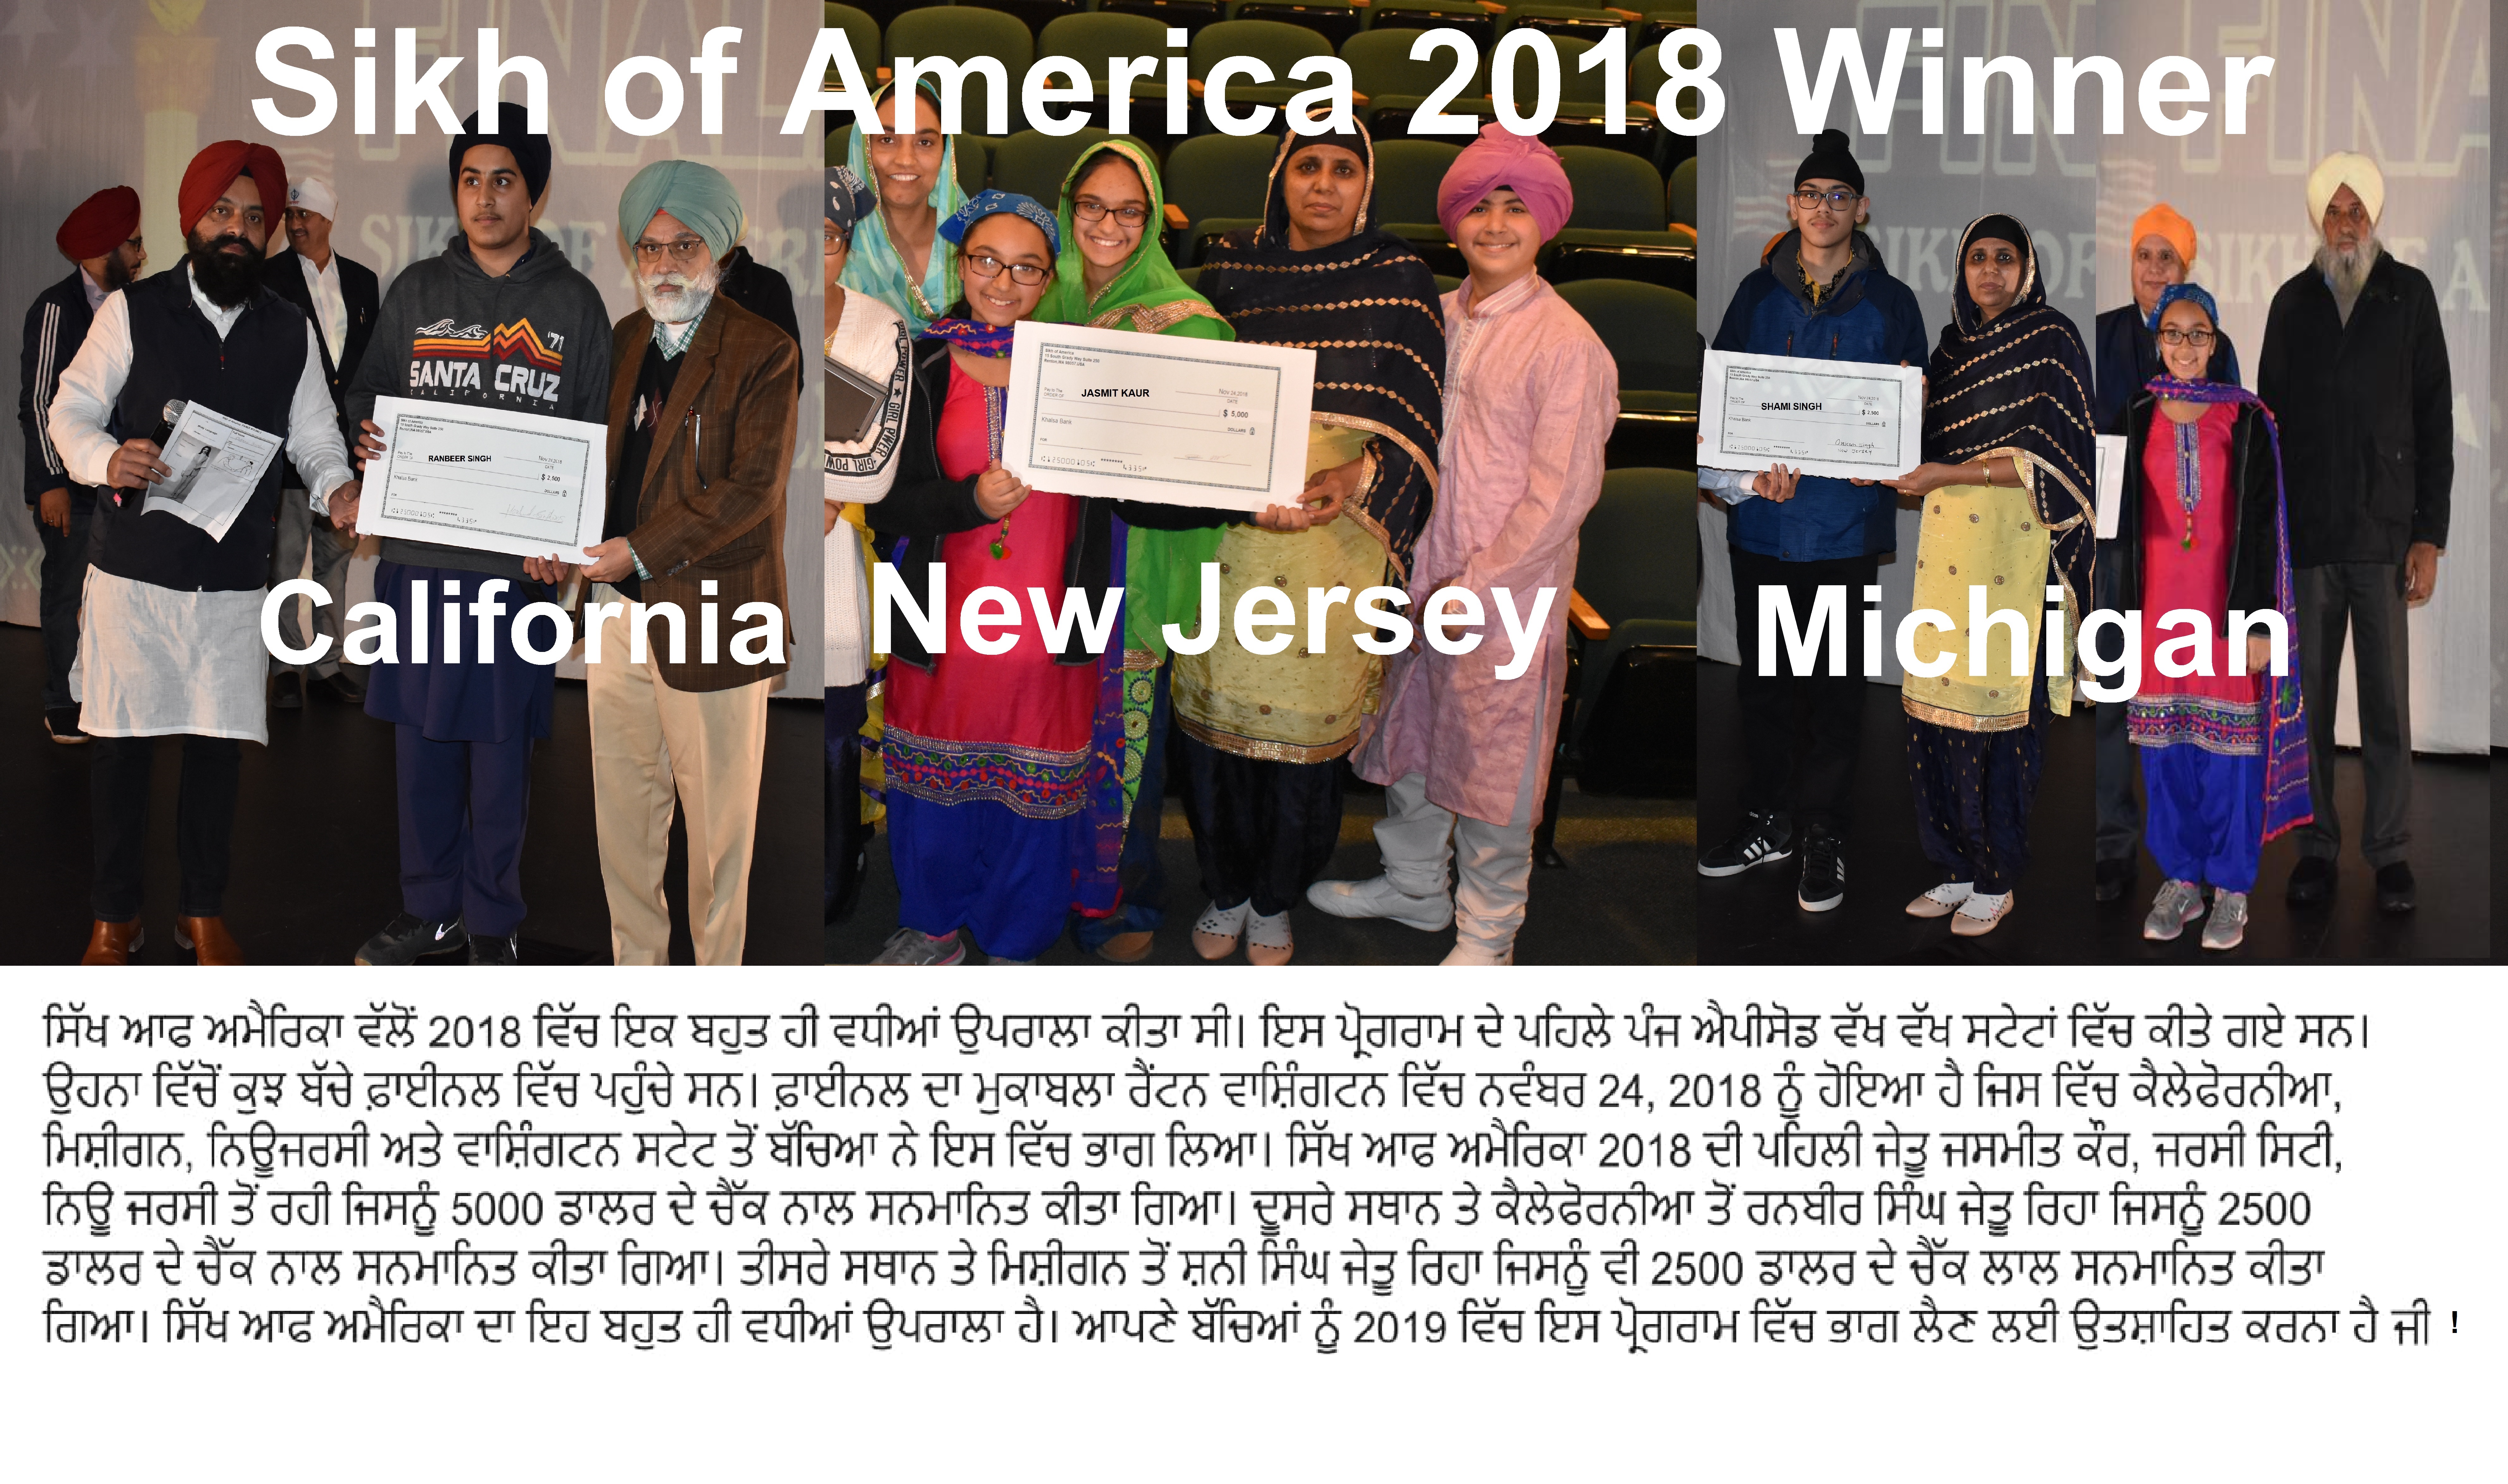 FINALE SIKH OF AMERICA 2018